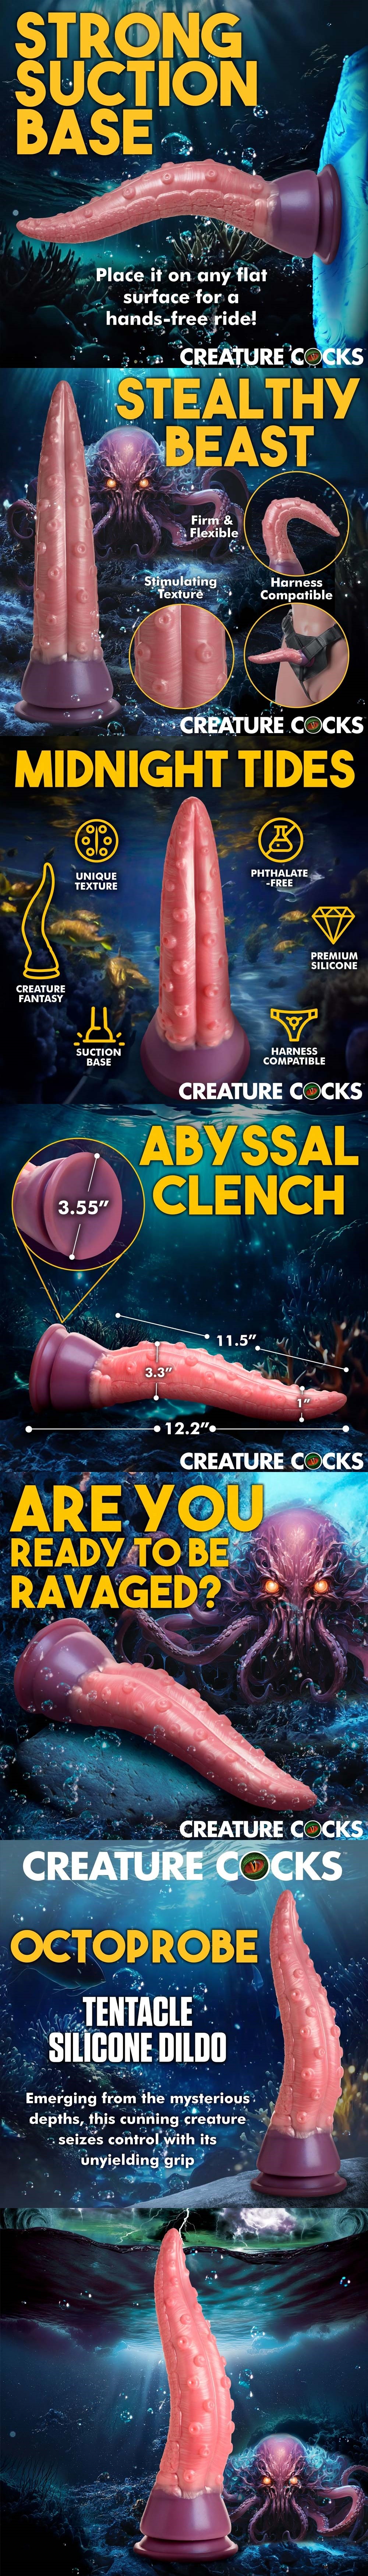 Creature Cocks Octoprobe Tentacle Silicone 12-Inch Giant Dildo